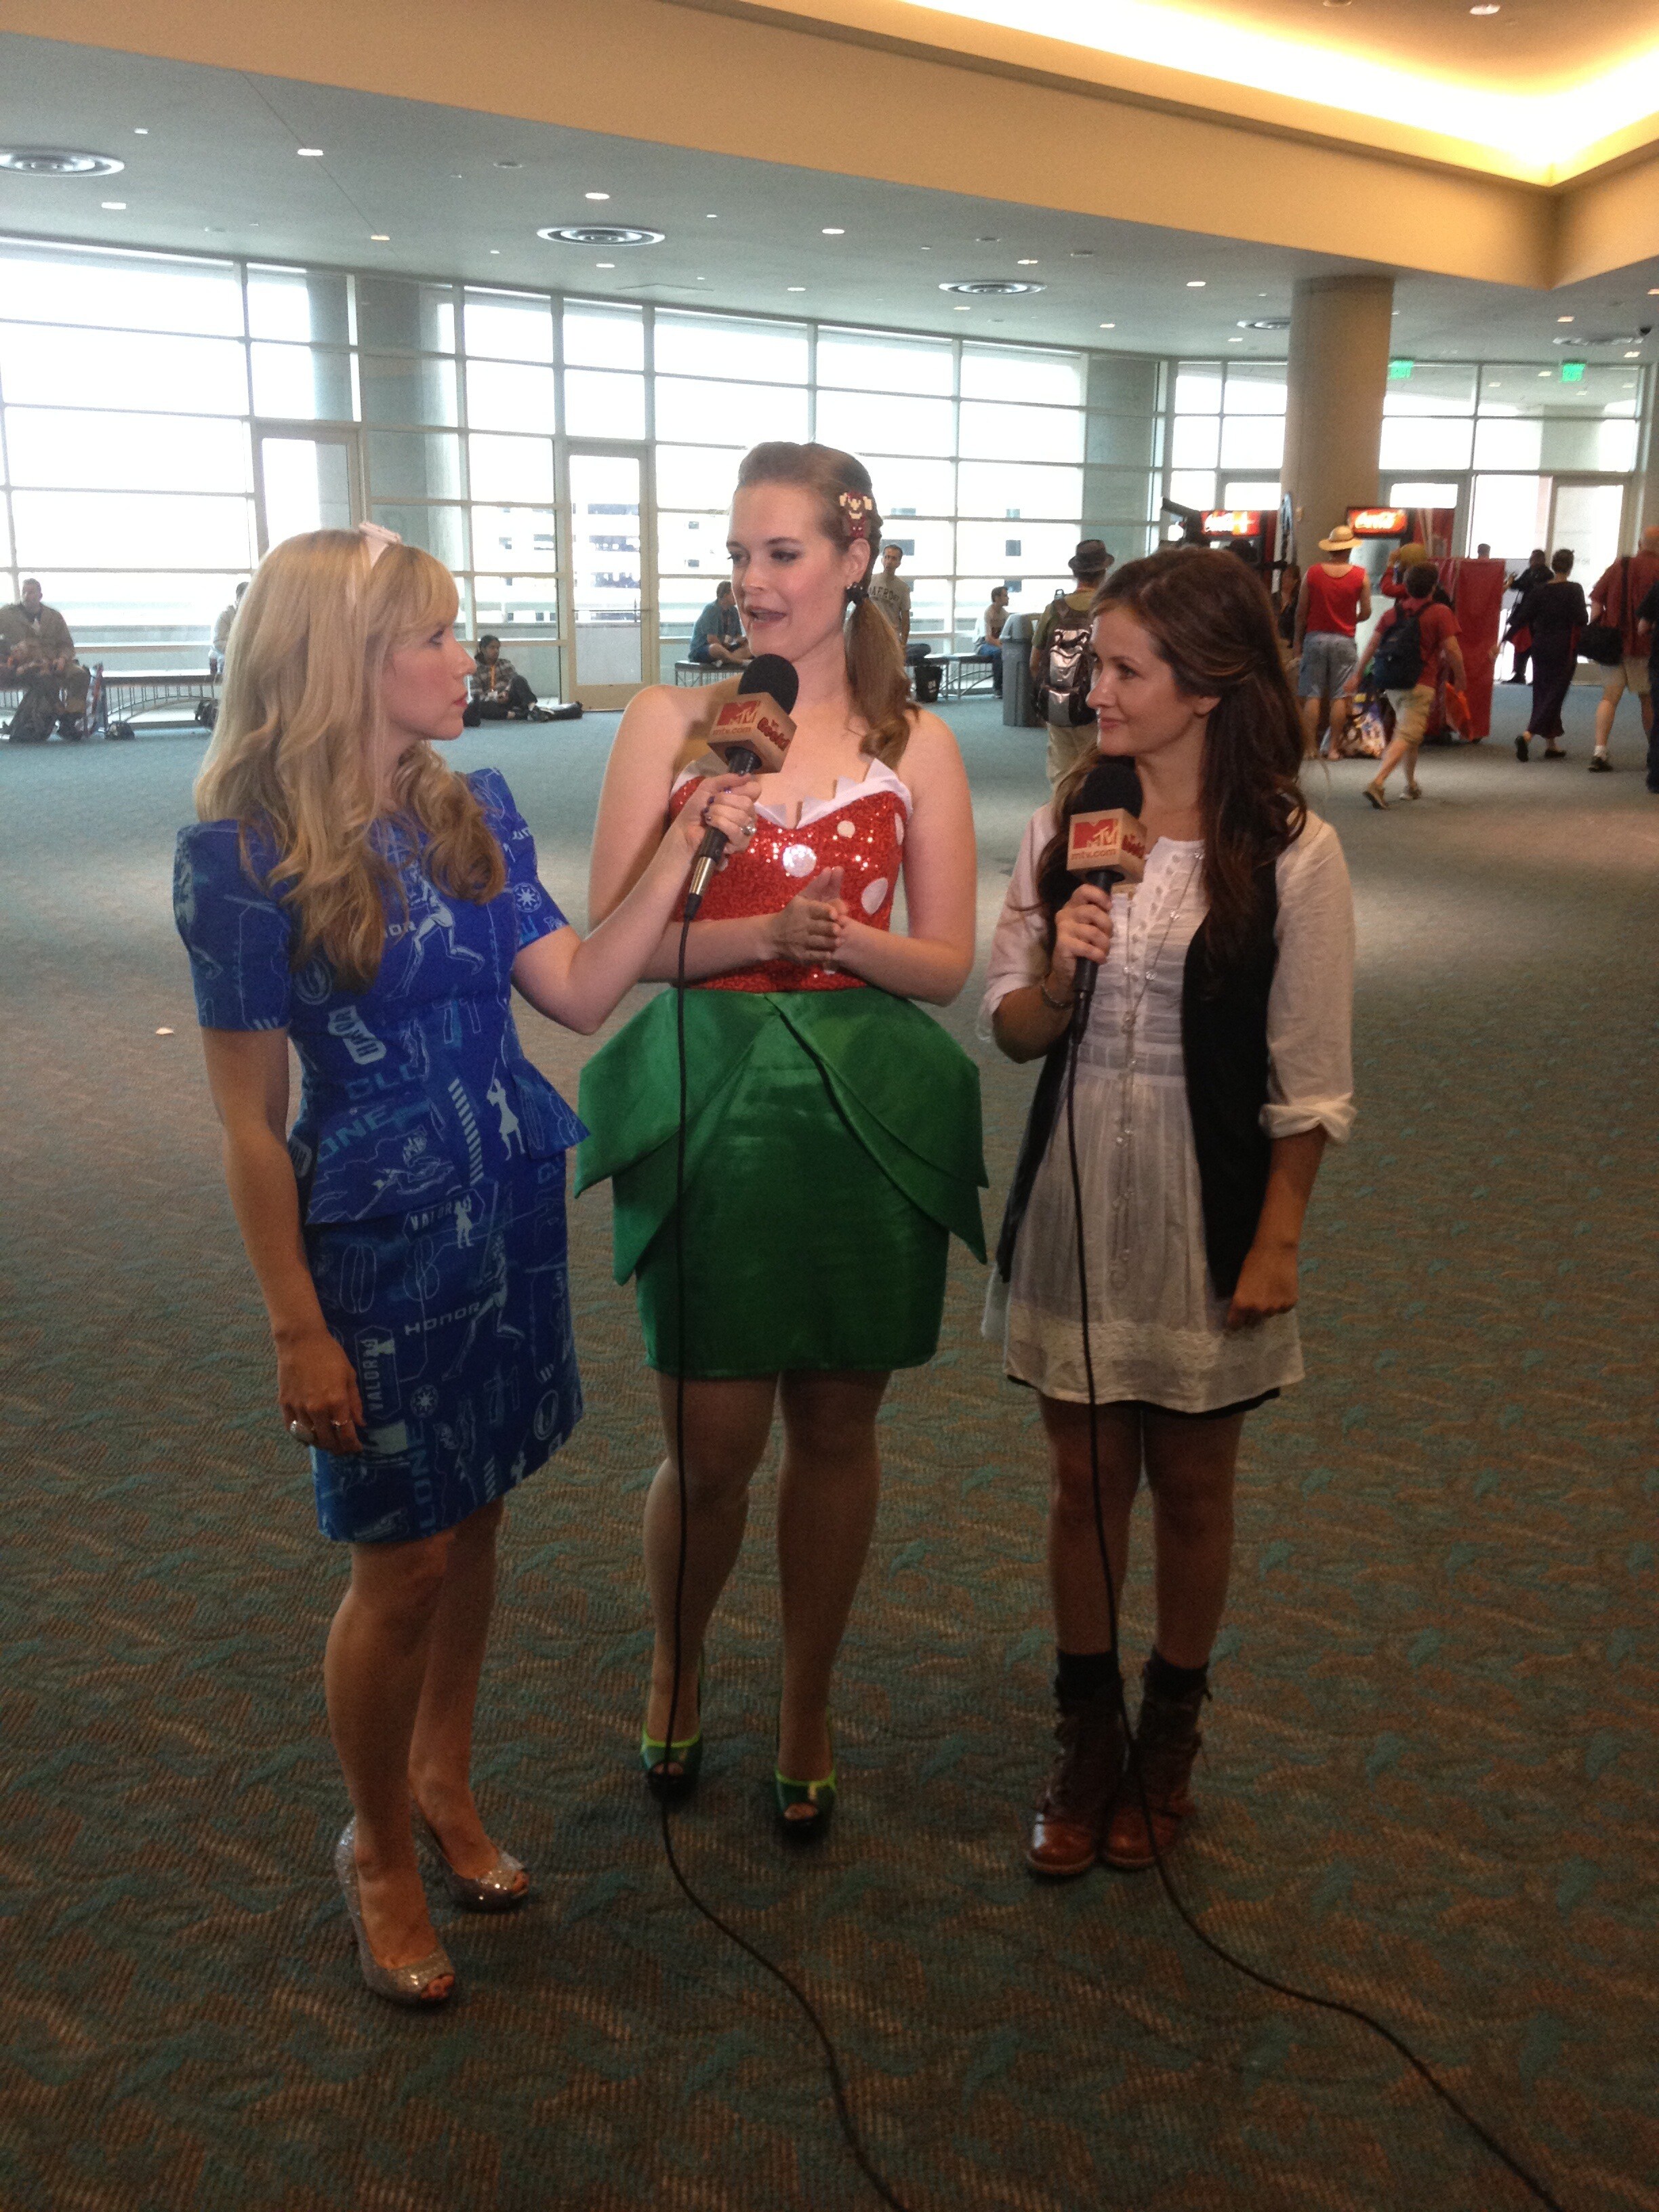 Clone Wars Co-Hosts! Me and Catherine Taber interview 2nd place winner Lindz in her Mario Brothers dress!